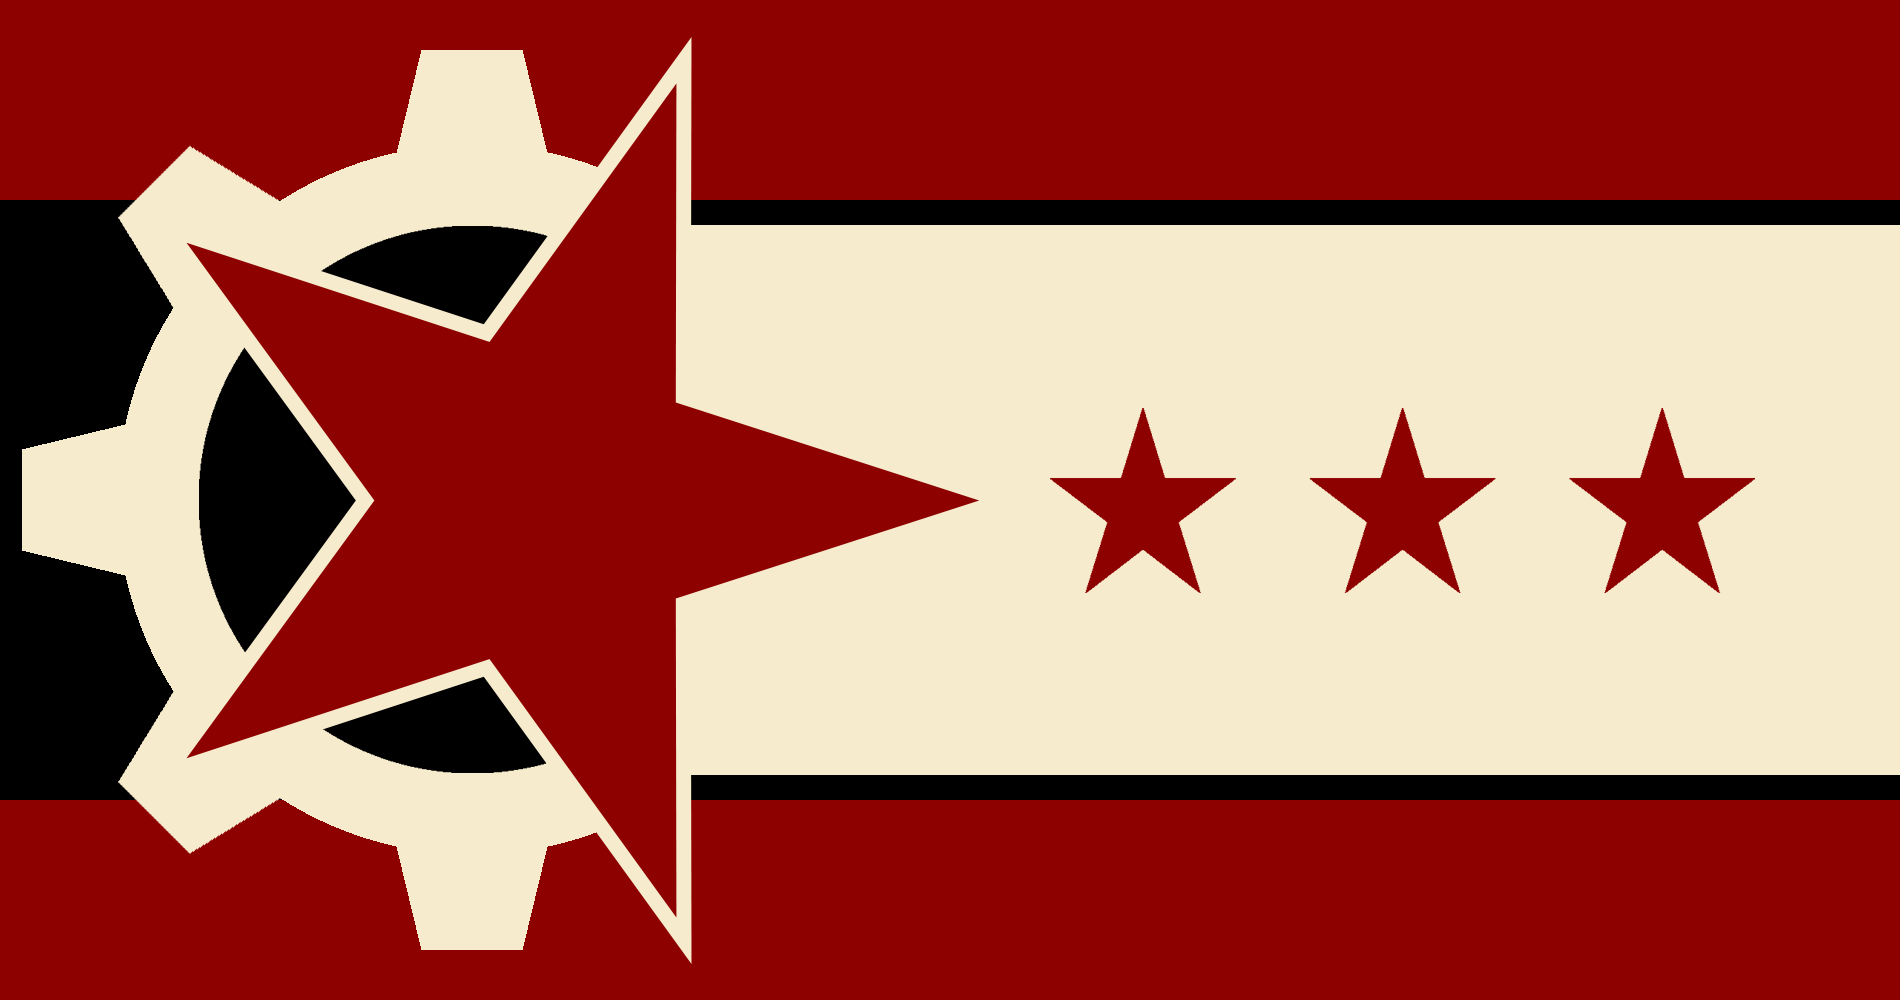 My recreation of the united earth government flag from the movie the wandering earth and a more chinesesocialist looking redesign rleftistvexillology